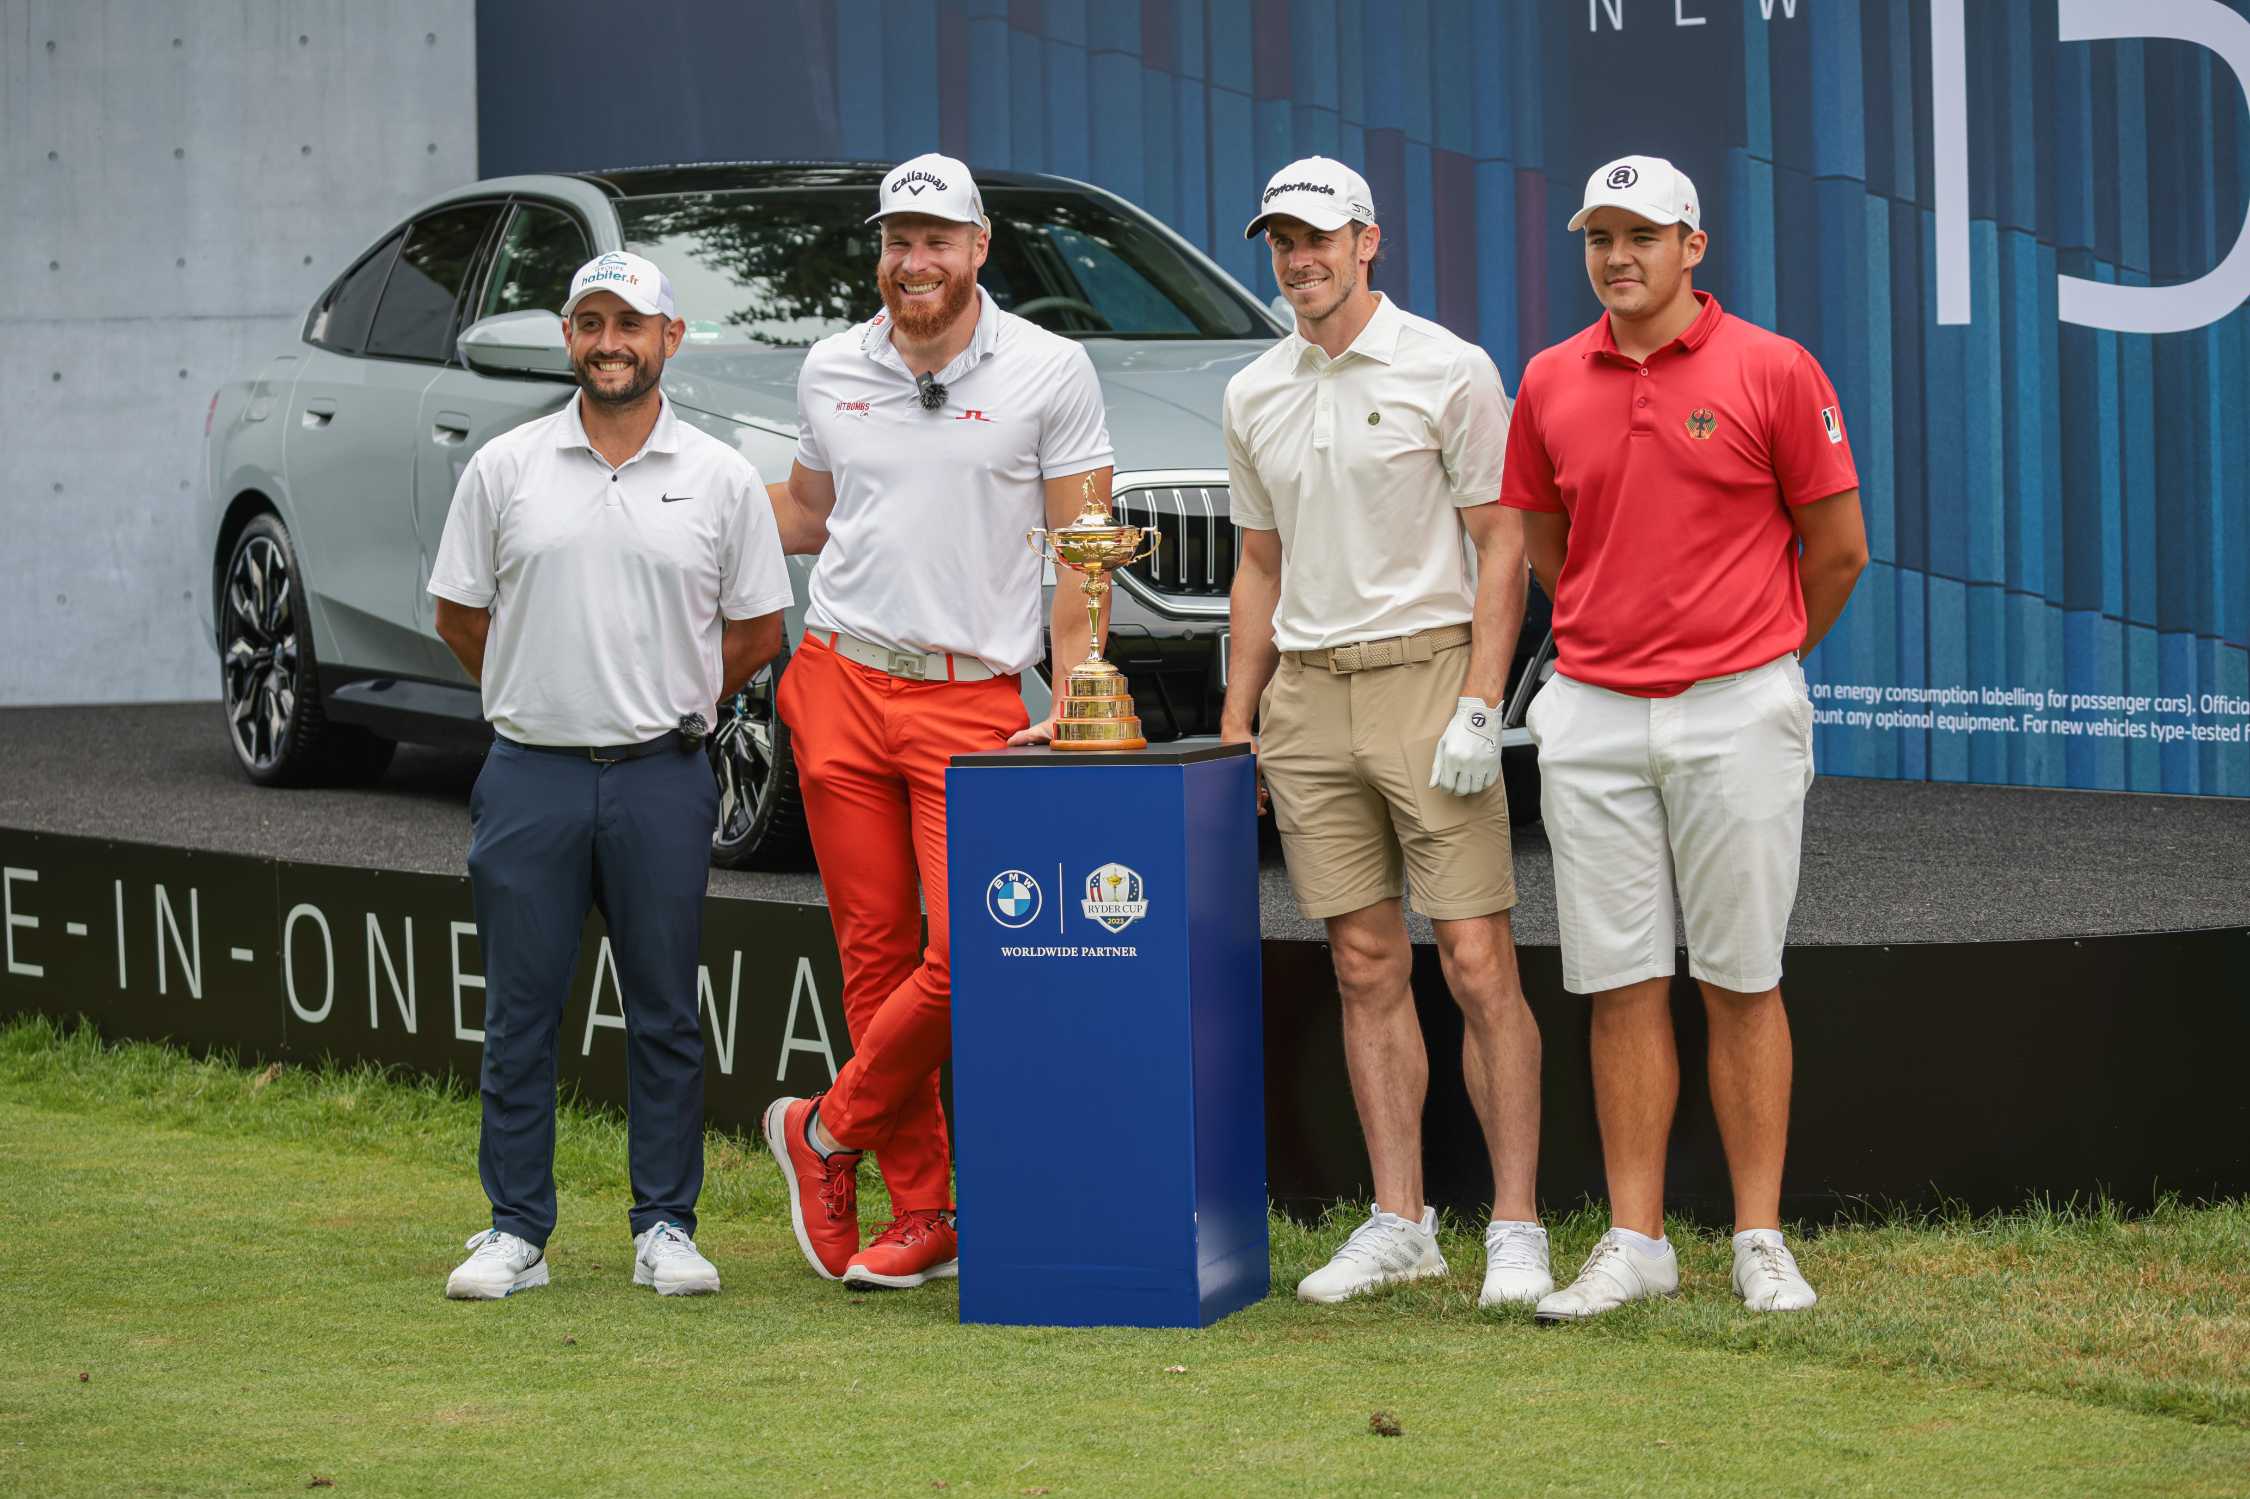 BMW International Open Images from the Pro-Am morning tournament